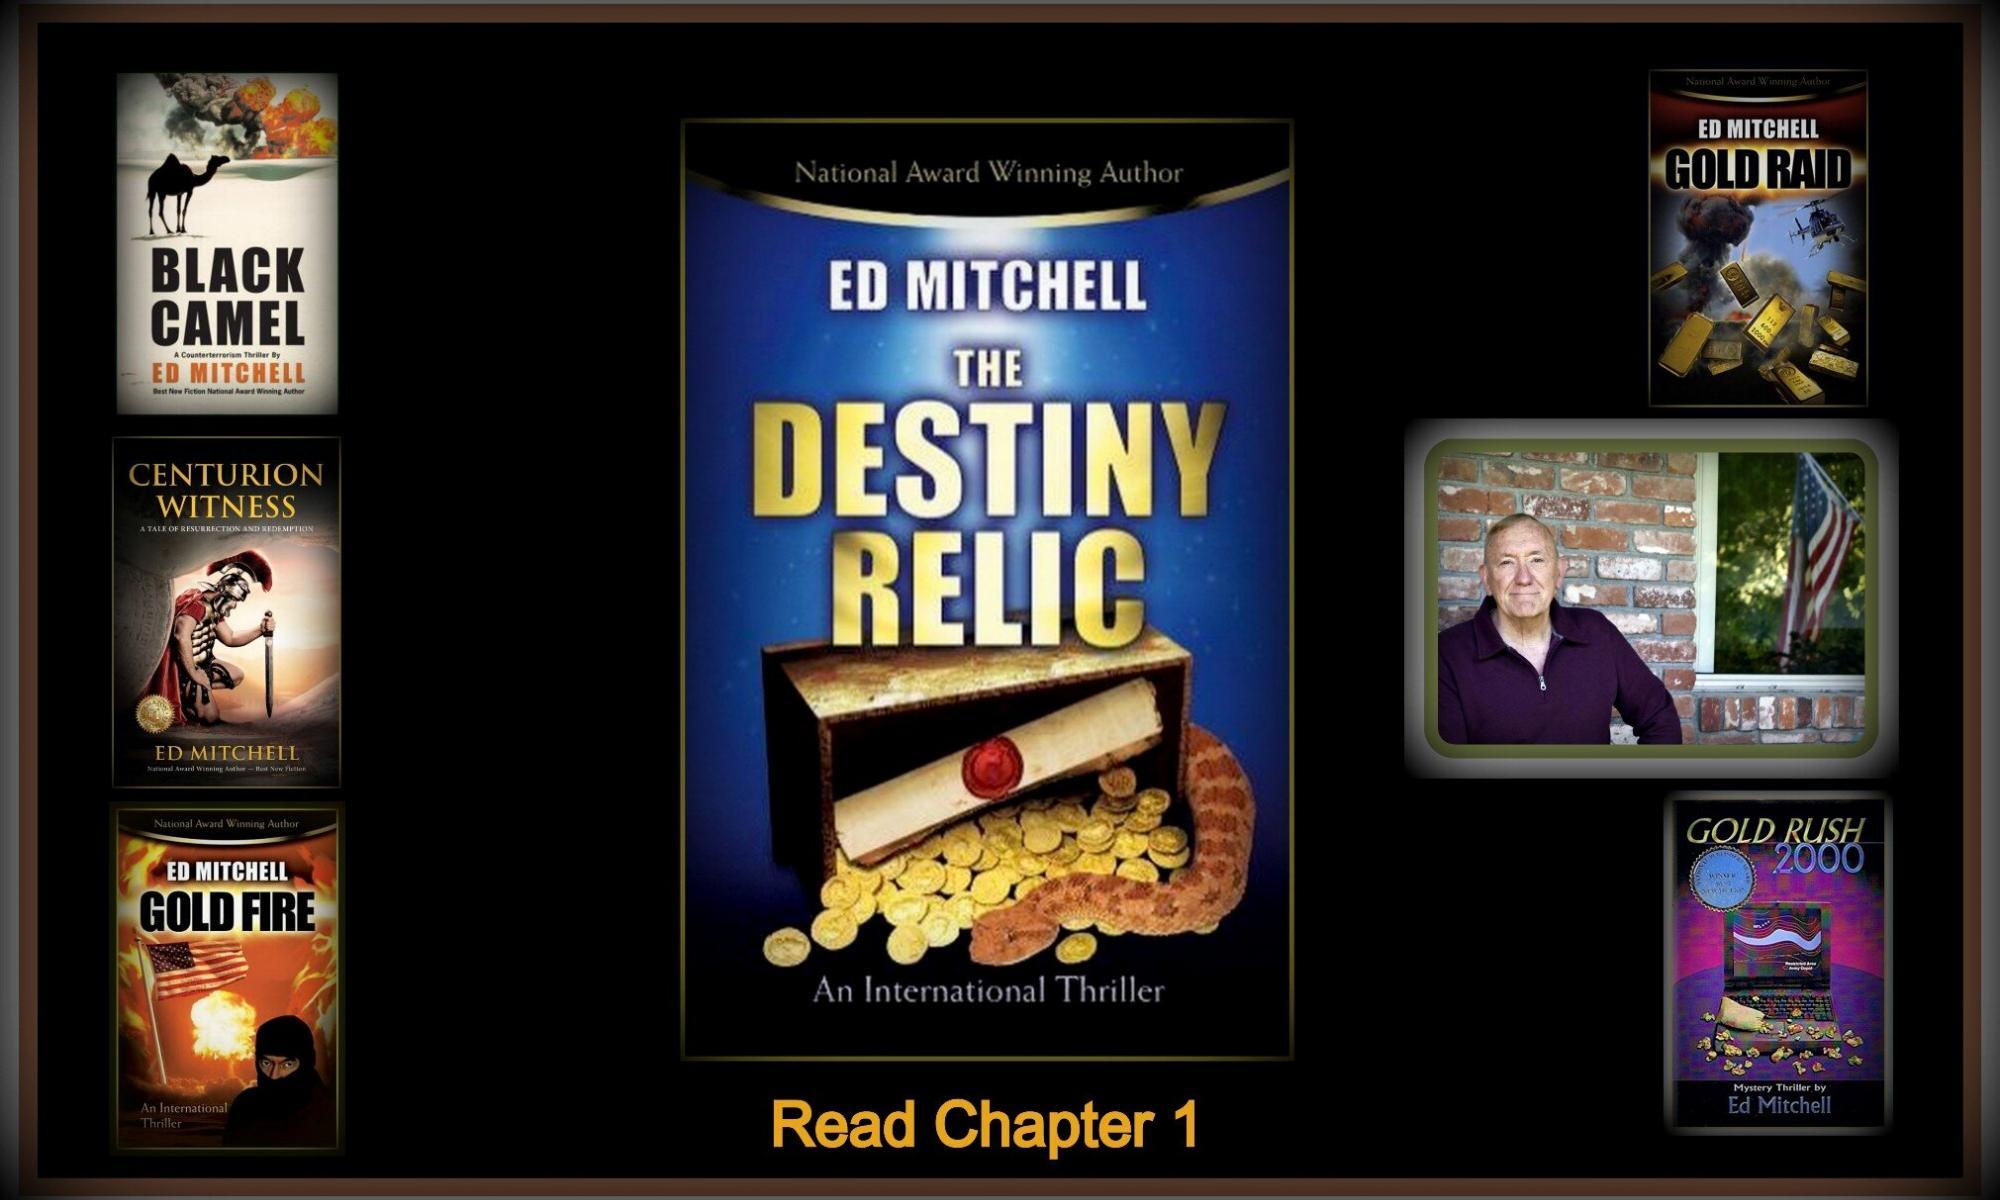 The Destiny Relic is a book surrounded by the author's prior books